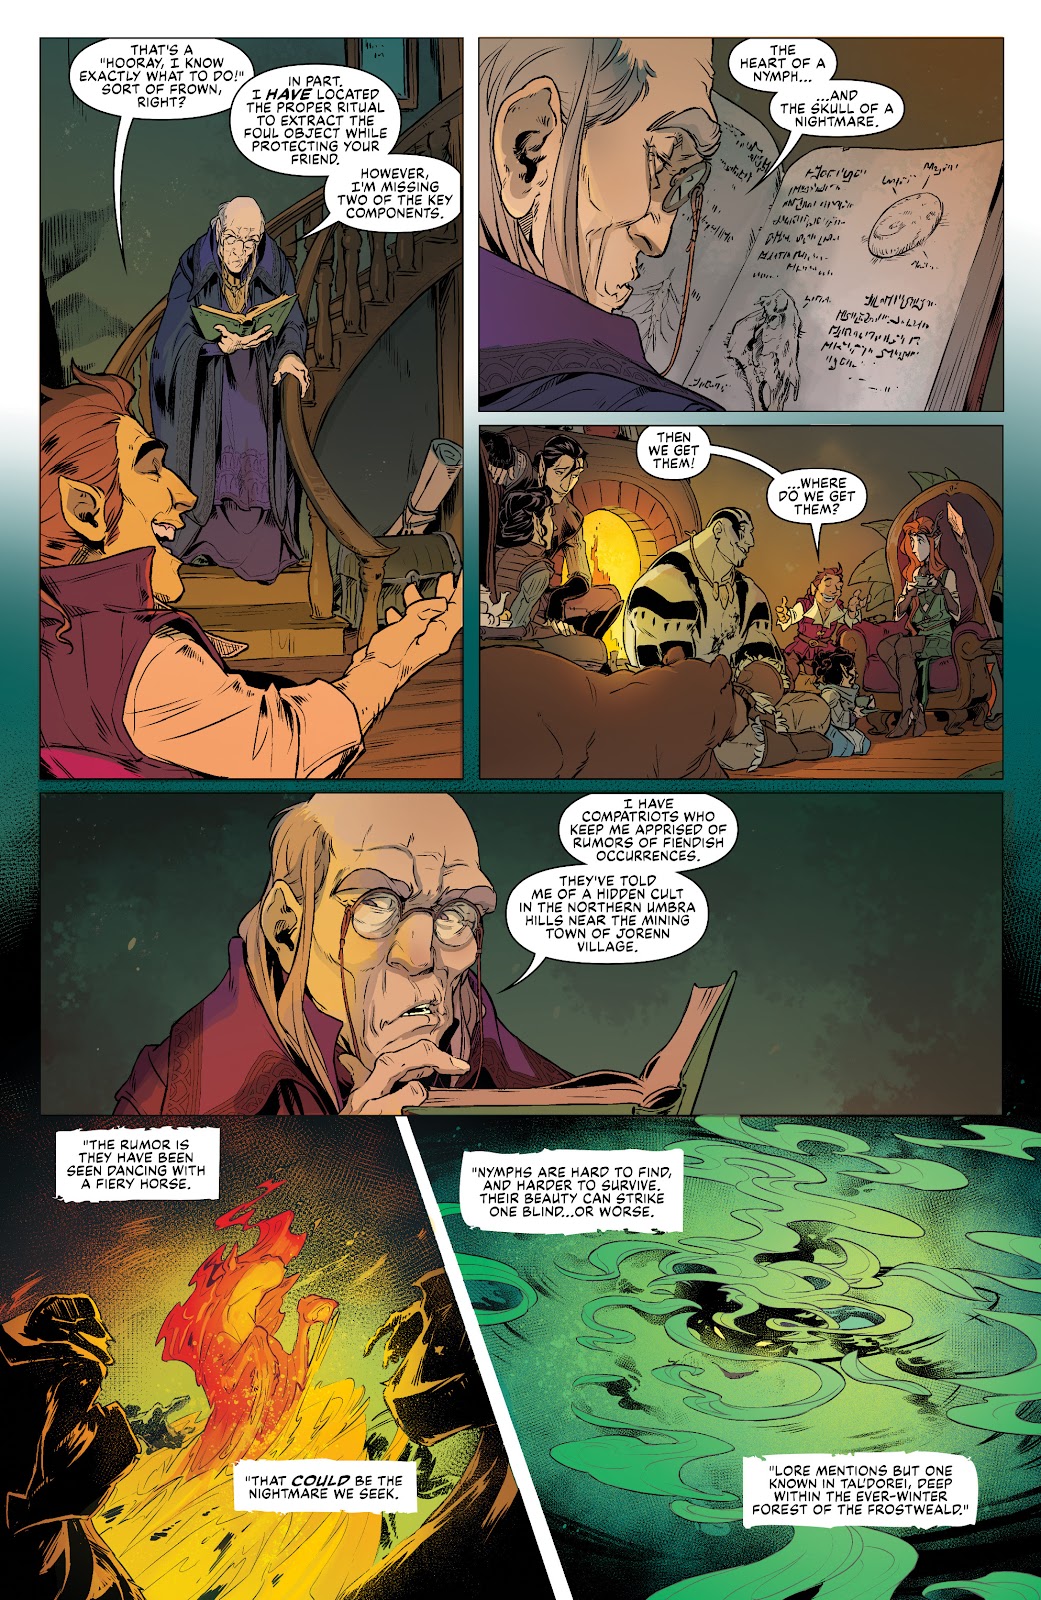 Critical Role Vox Machina Origins (2019) issue 4 - Page 4